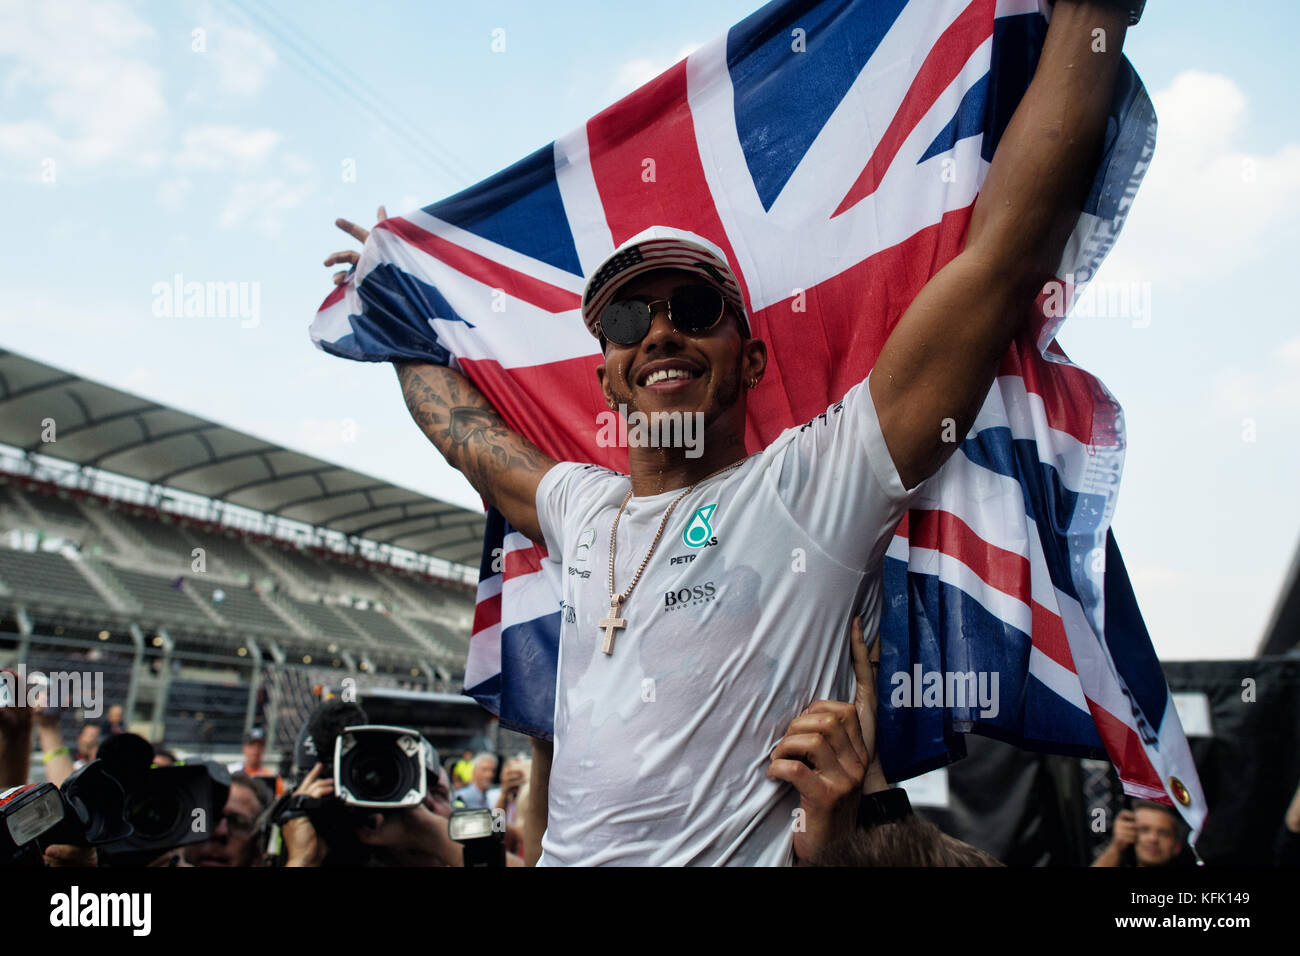 Mercedes' Lewis Hamilton celebrates winning the Formula One drivers' championship during the Mexican Grand Prix at the Autodromo Hermanos Rodriguez, Mexico City. Stock Photo